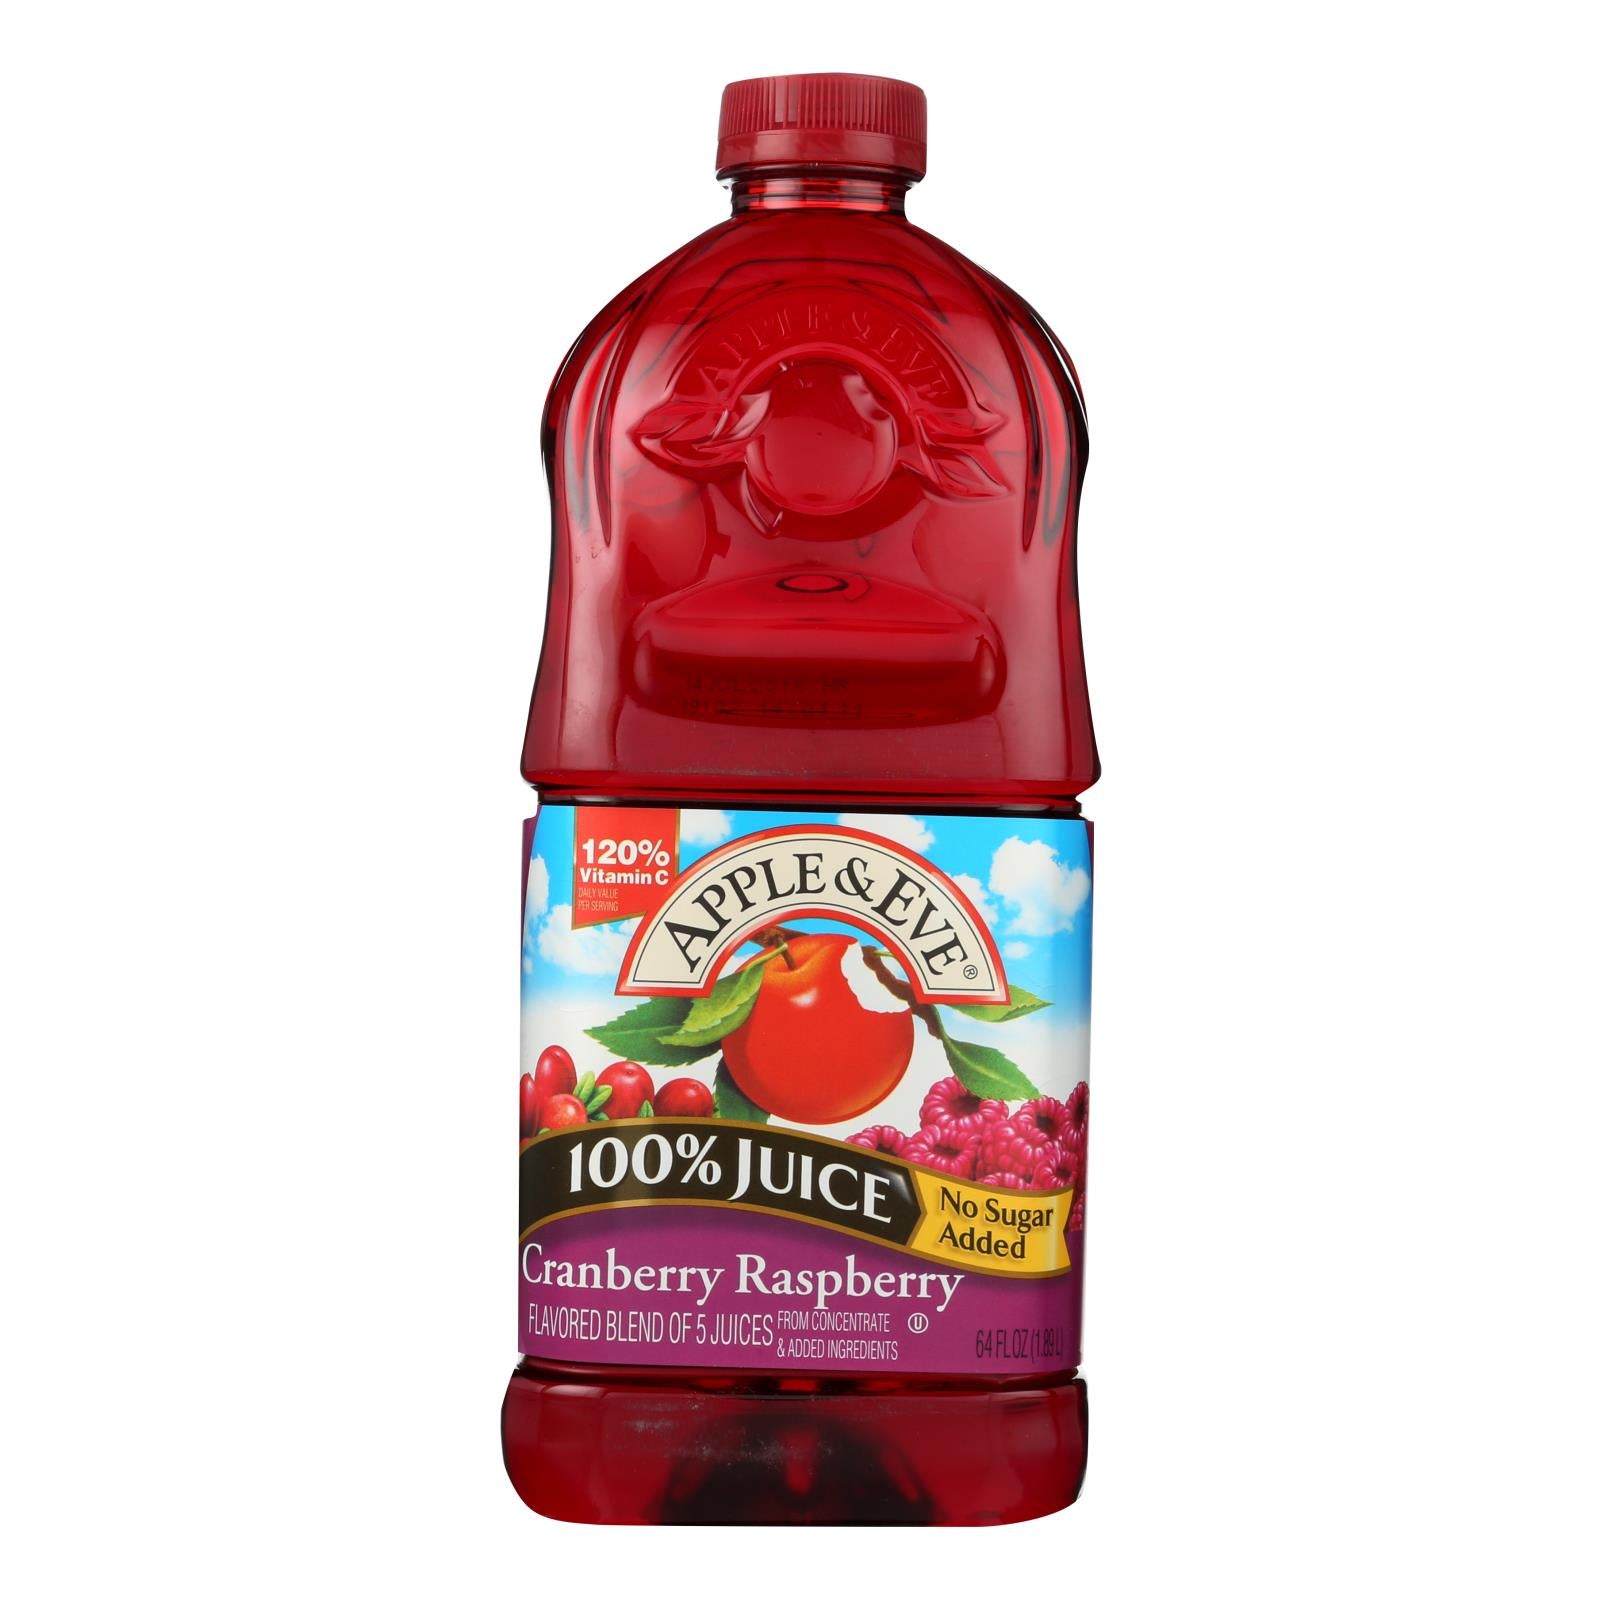 Apple & Eve, Apple and Eve 100 Percent Juice - Cranberry Juice and More - Case of 8 - 64 Fl oz. (Pack of 8)